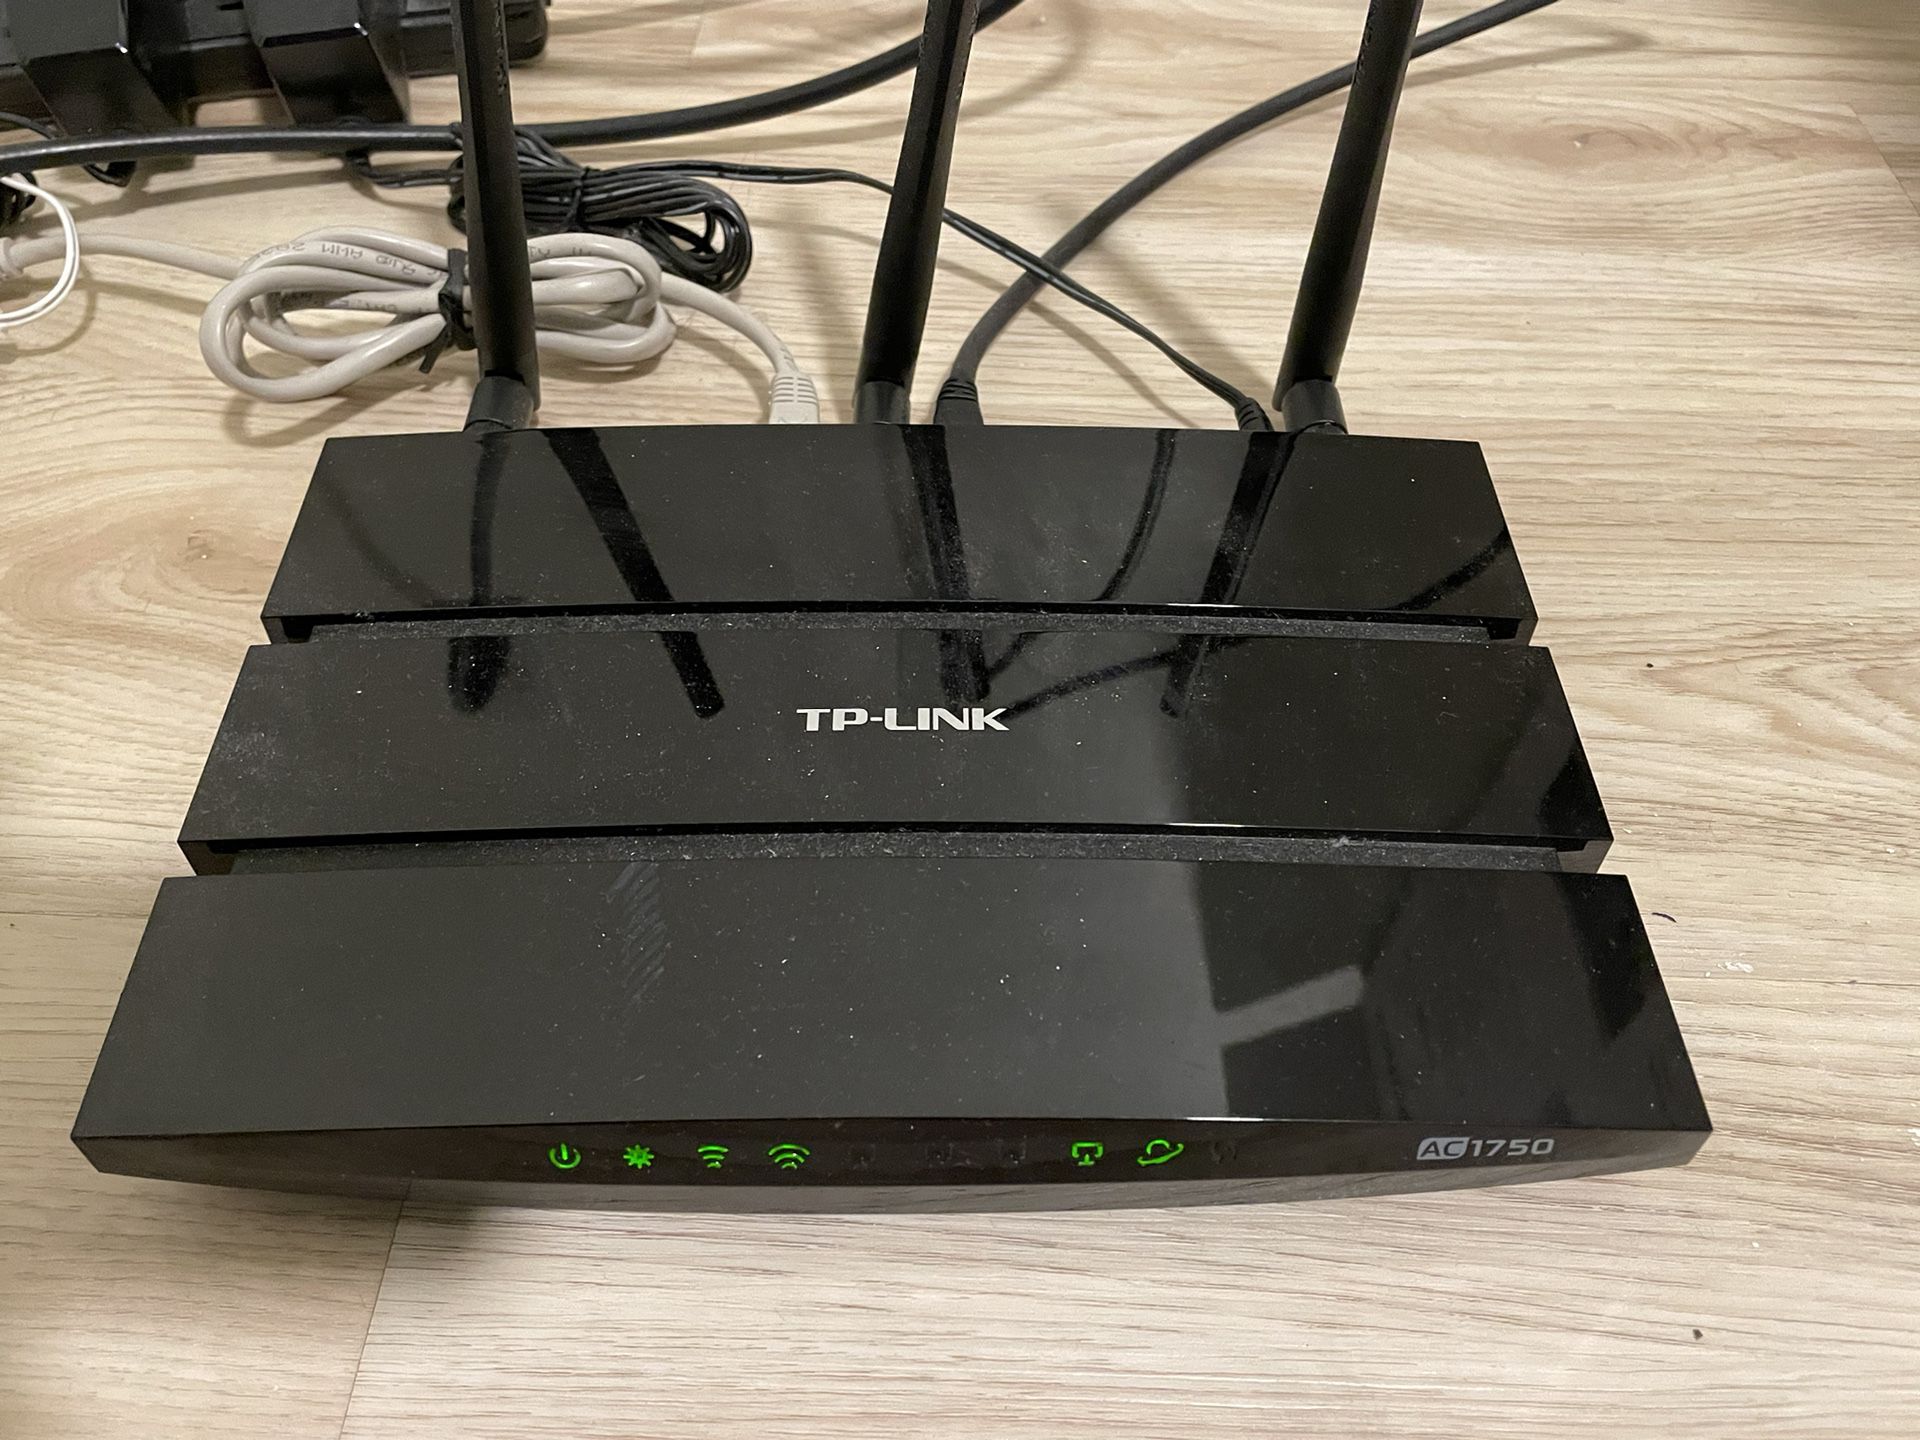 5GHz Internet Setup (WiFi Router and WiFI Modem)